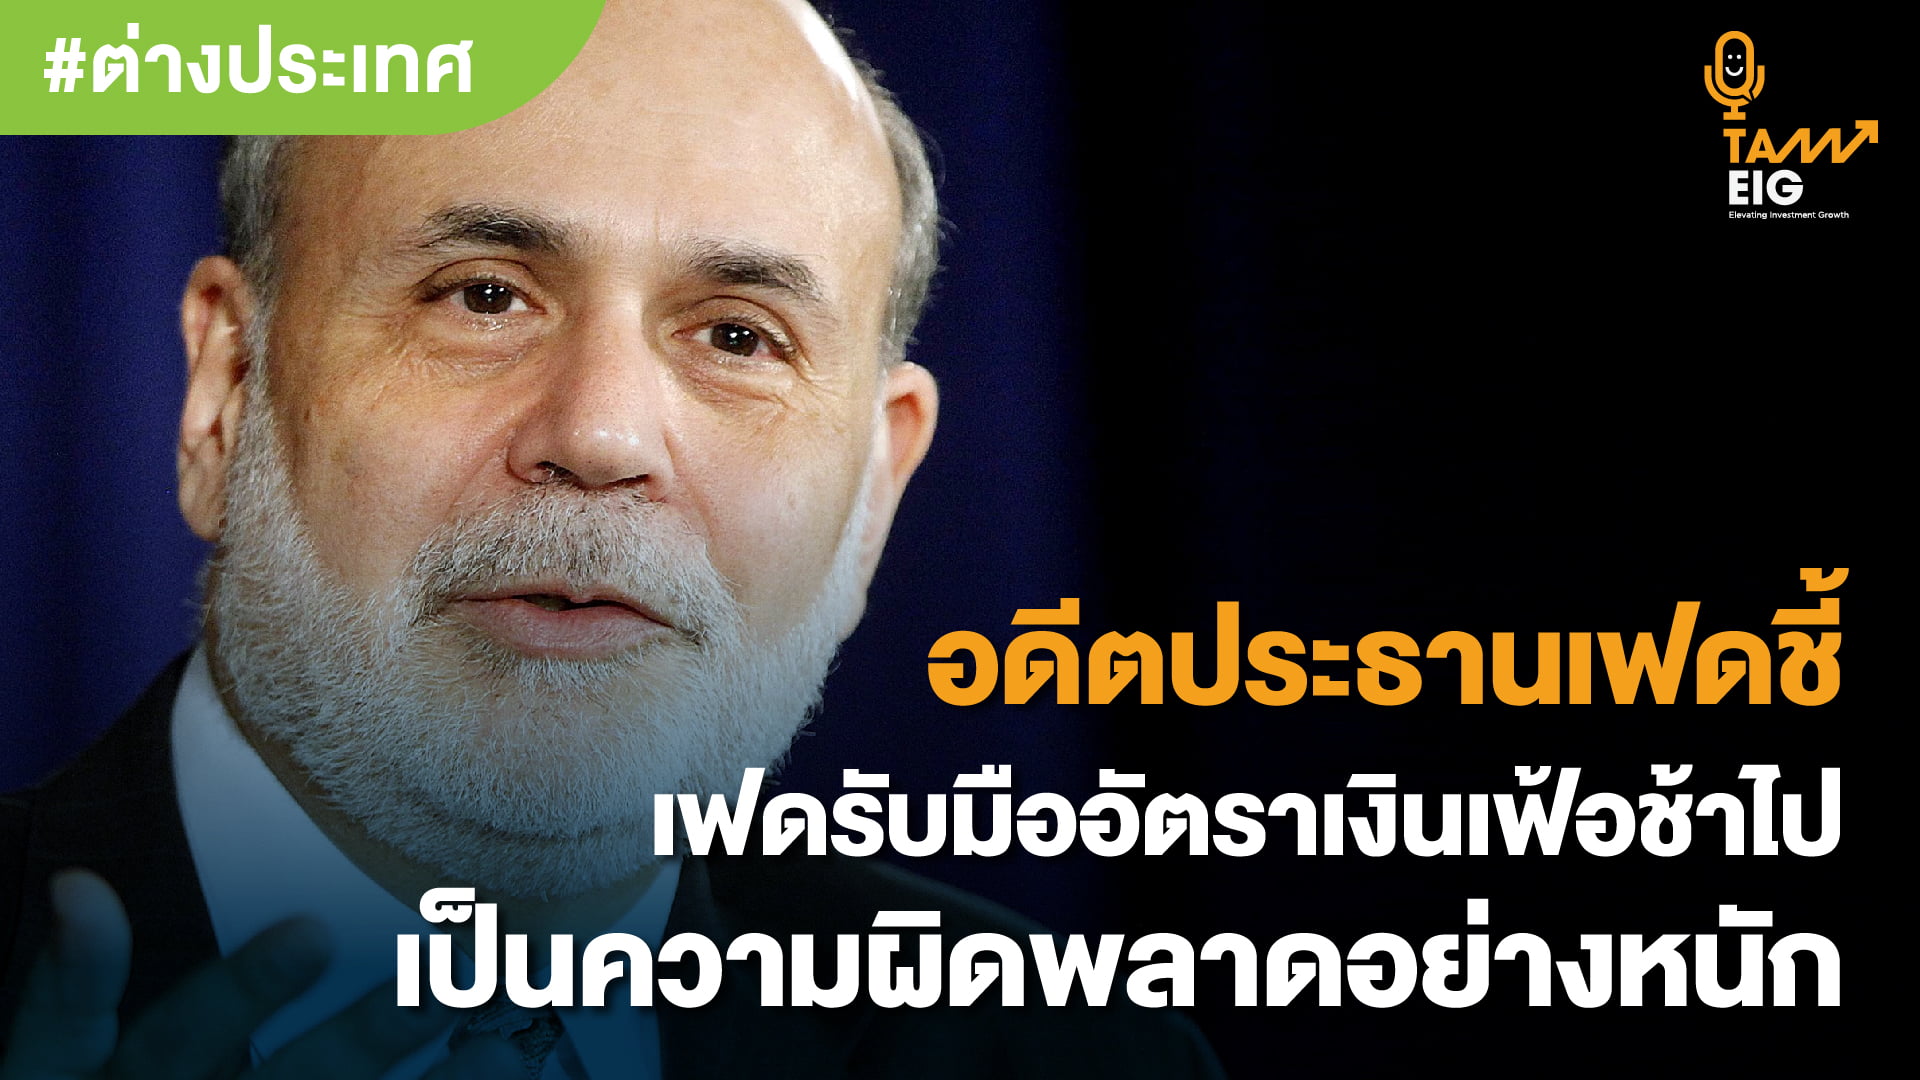 ECONOMY Bernanke says the Fed’s slow response to inflation ‘was a mistake’